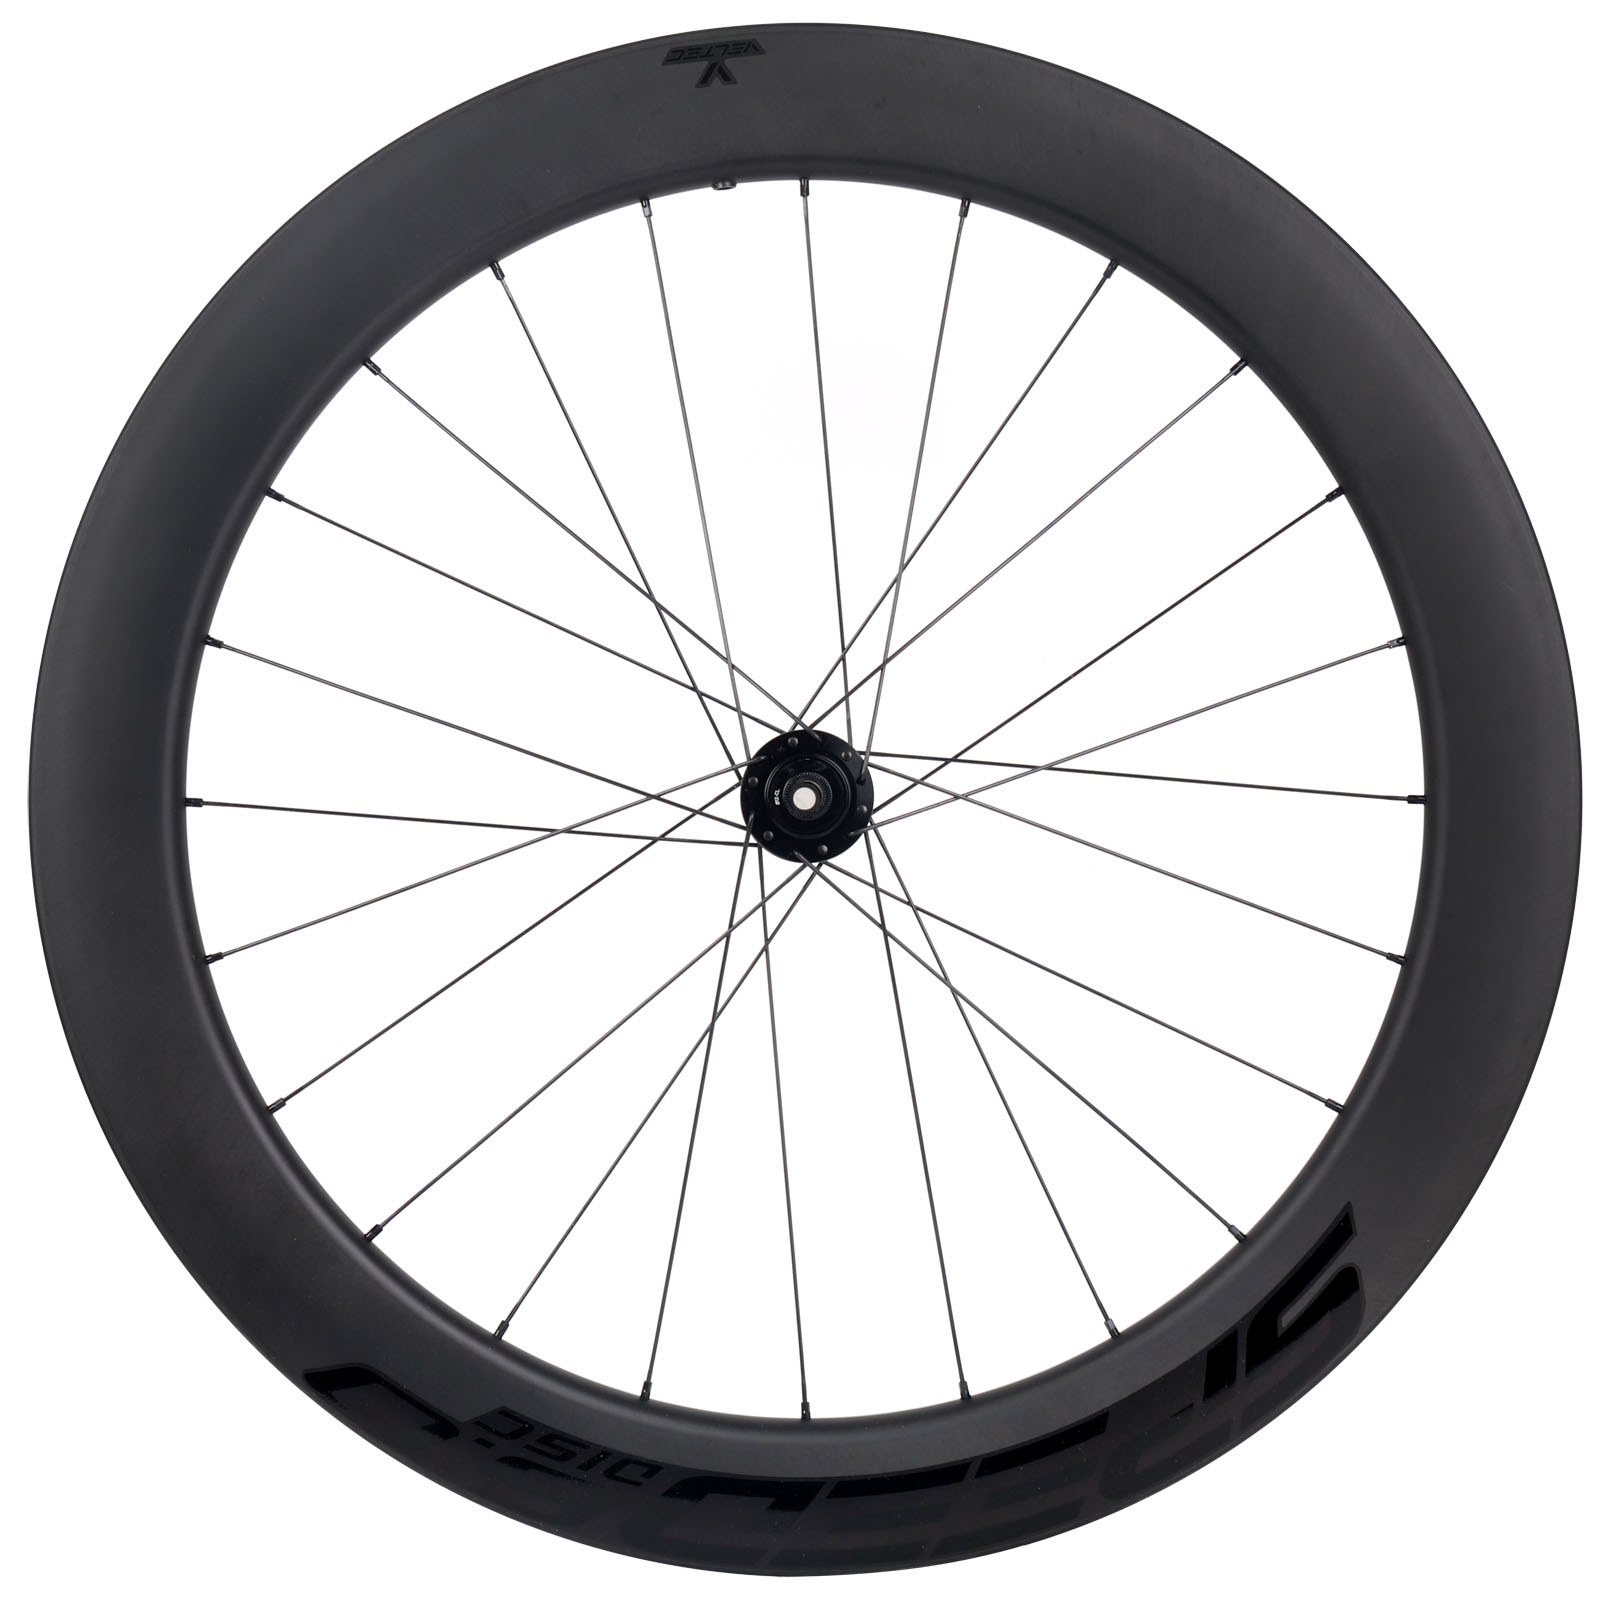 Image of Veltec Speed 6.0 Disc Carbon Front Wheel - Clincher - 12x100mm - black with black decals